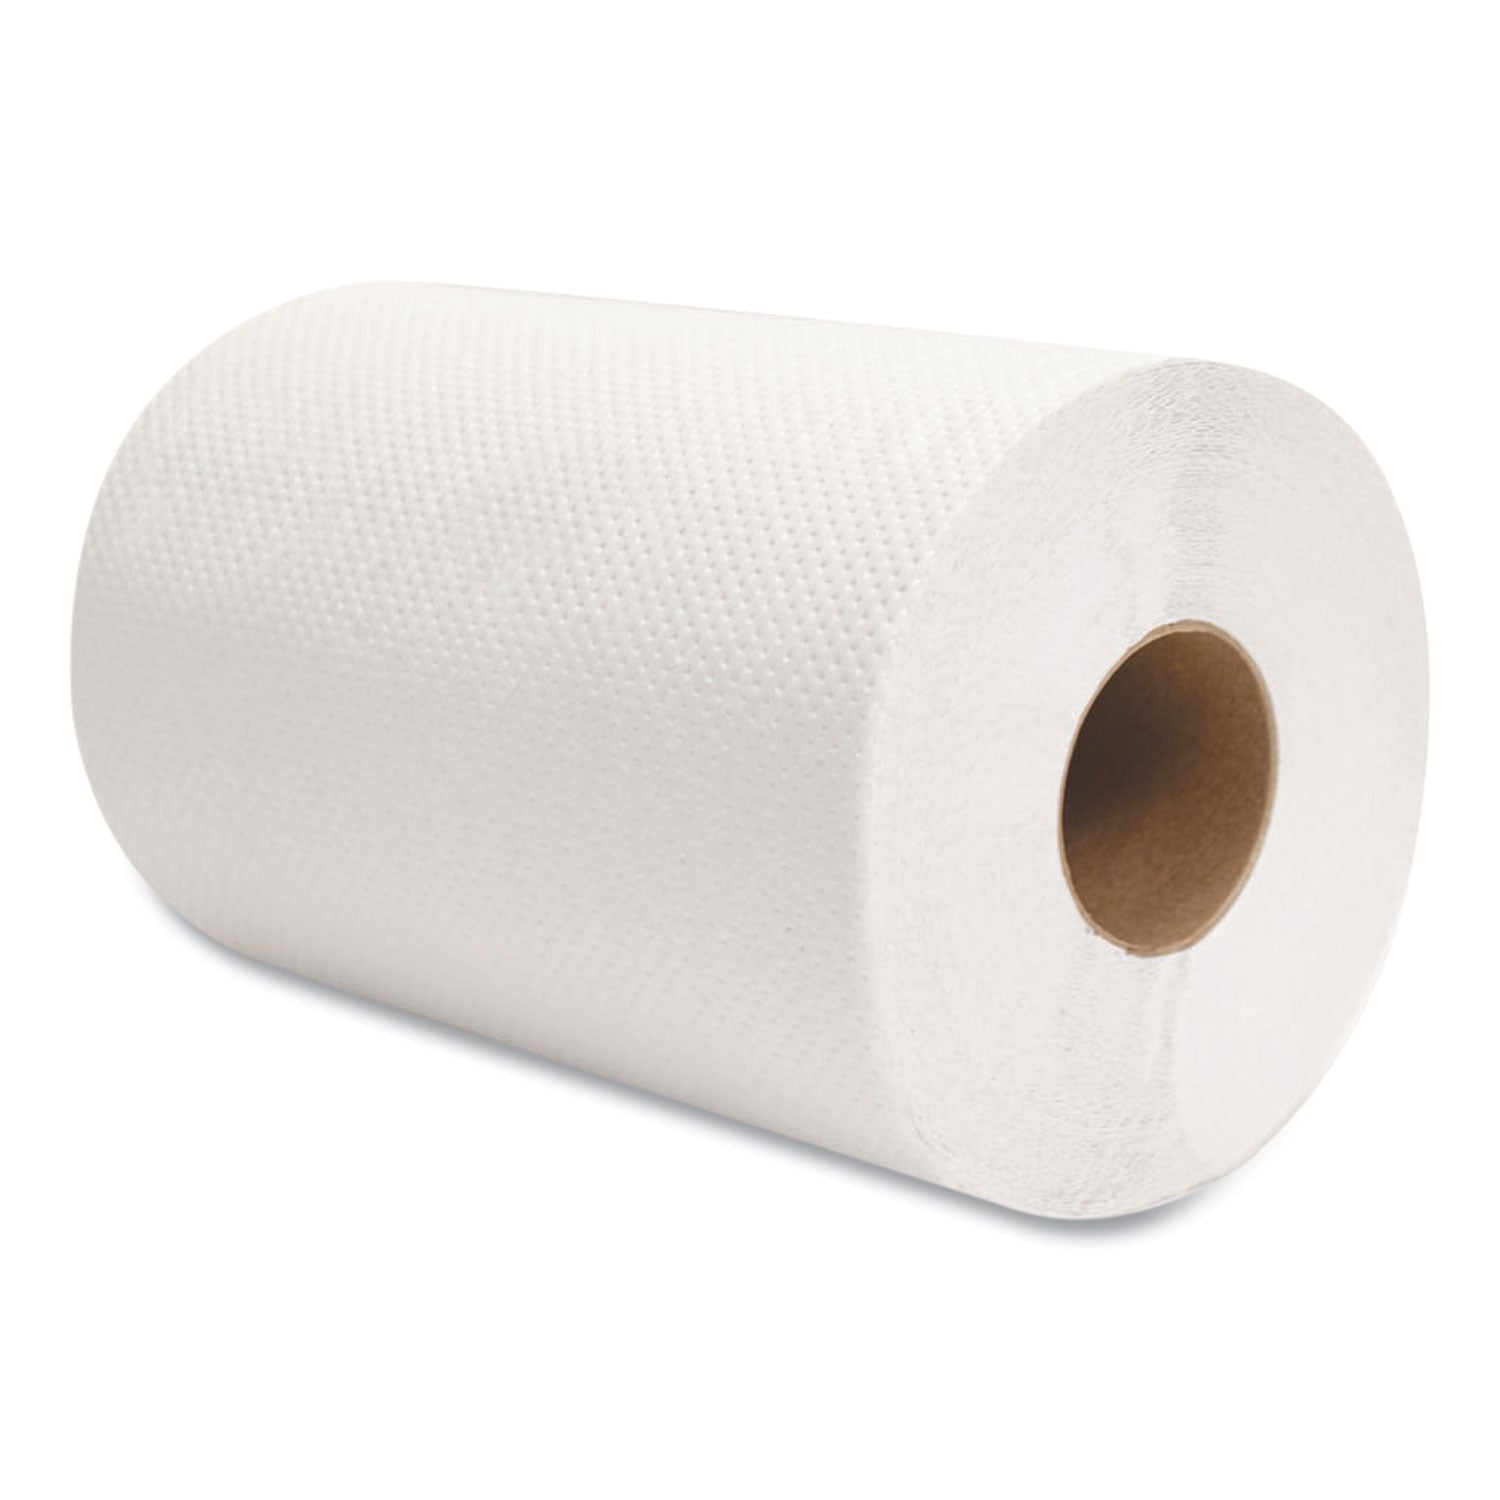 Morsoft Universal Roll Towels, 1-Ply, 8" x 350 ft, White, 12 Rolls/Carton - 